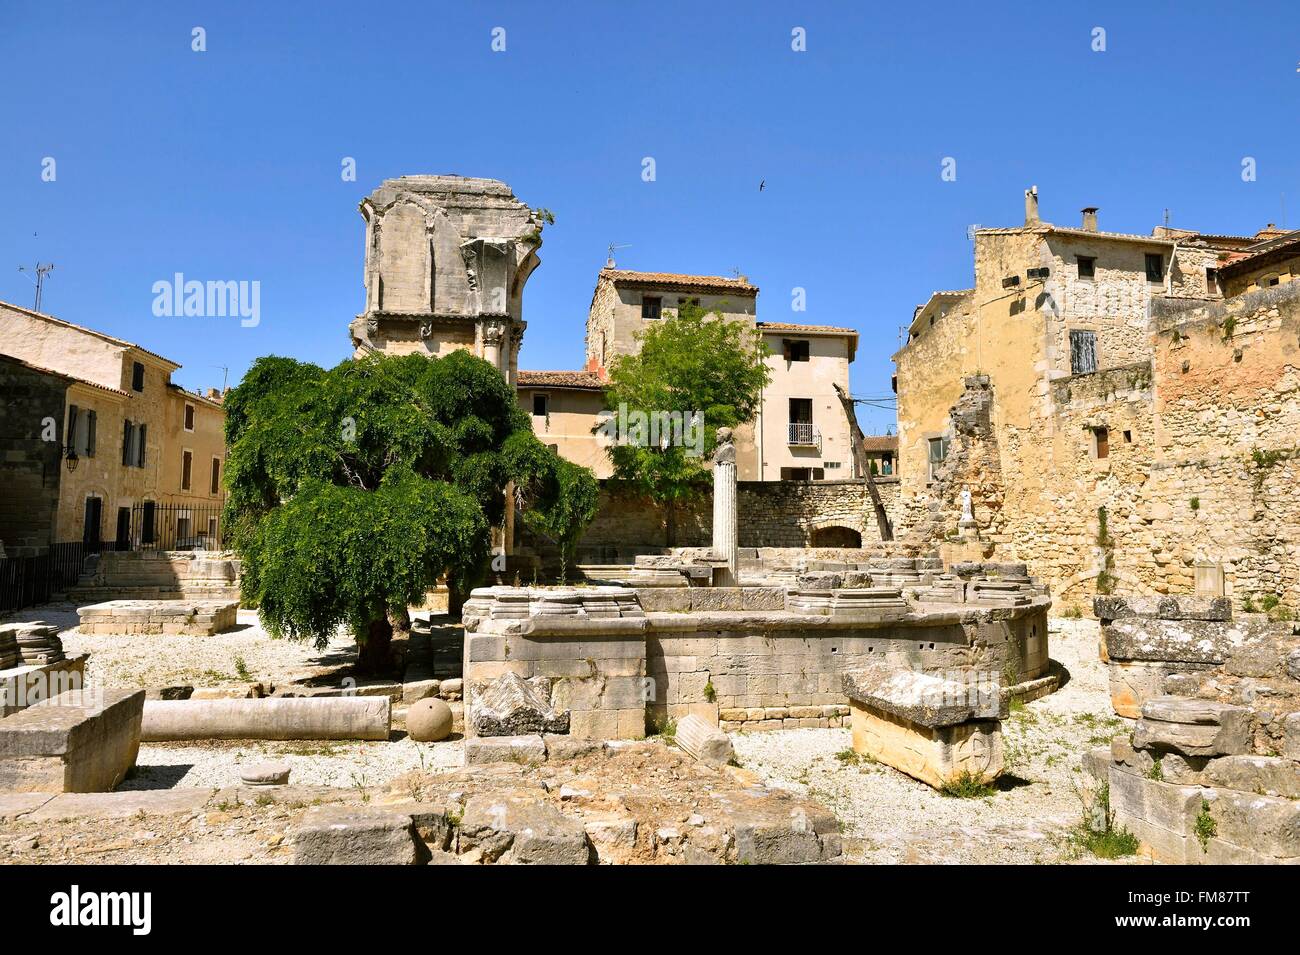 France, Gard, Saint Gilles, Abbey Church of 12th-13th century, listed as World Heritage by UNESCO under the road to St Jacques de Compostela in France, ruins of the old church choir, ancient bell tower served by a rotating screw Saint Gilles staircase, La vis de Saint Gilles Stock Photo